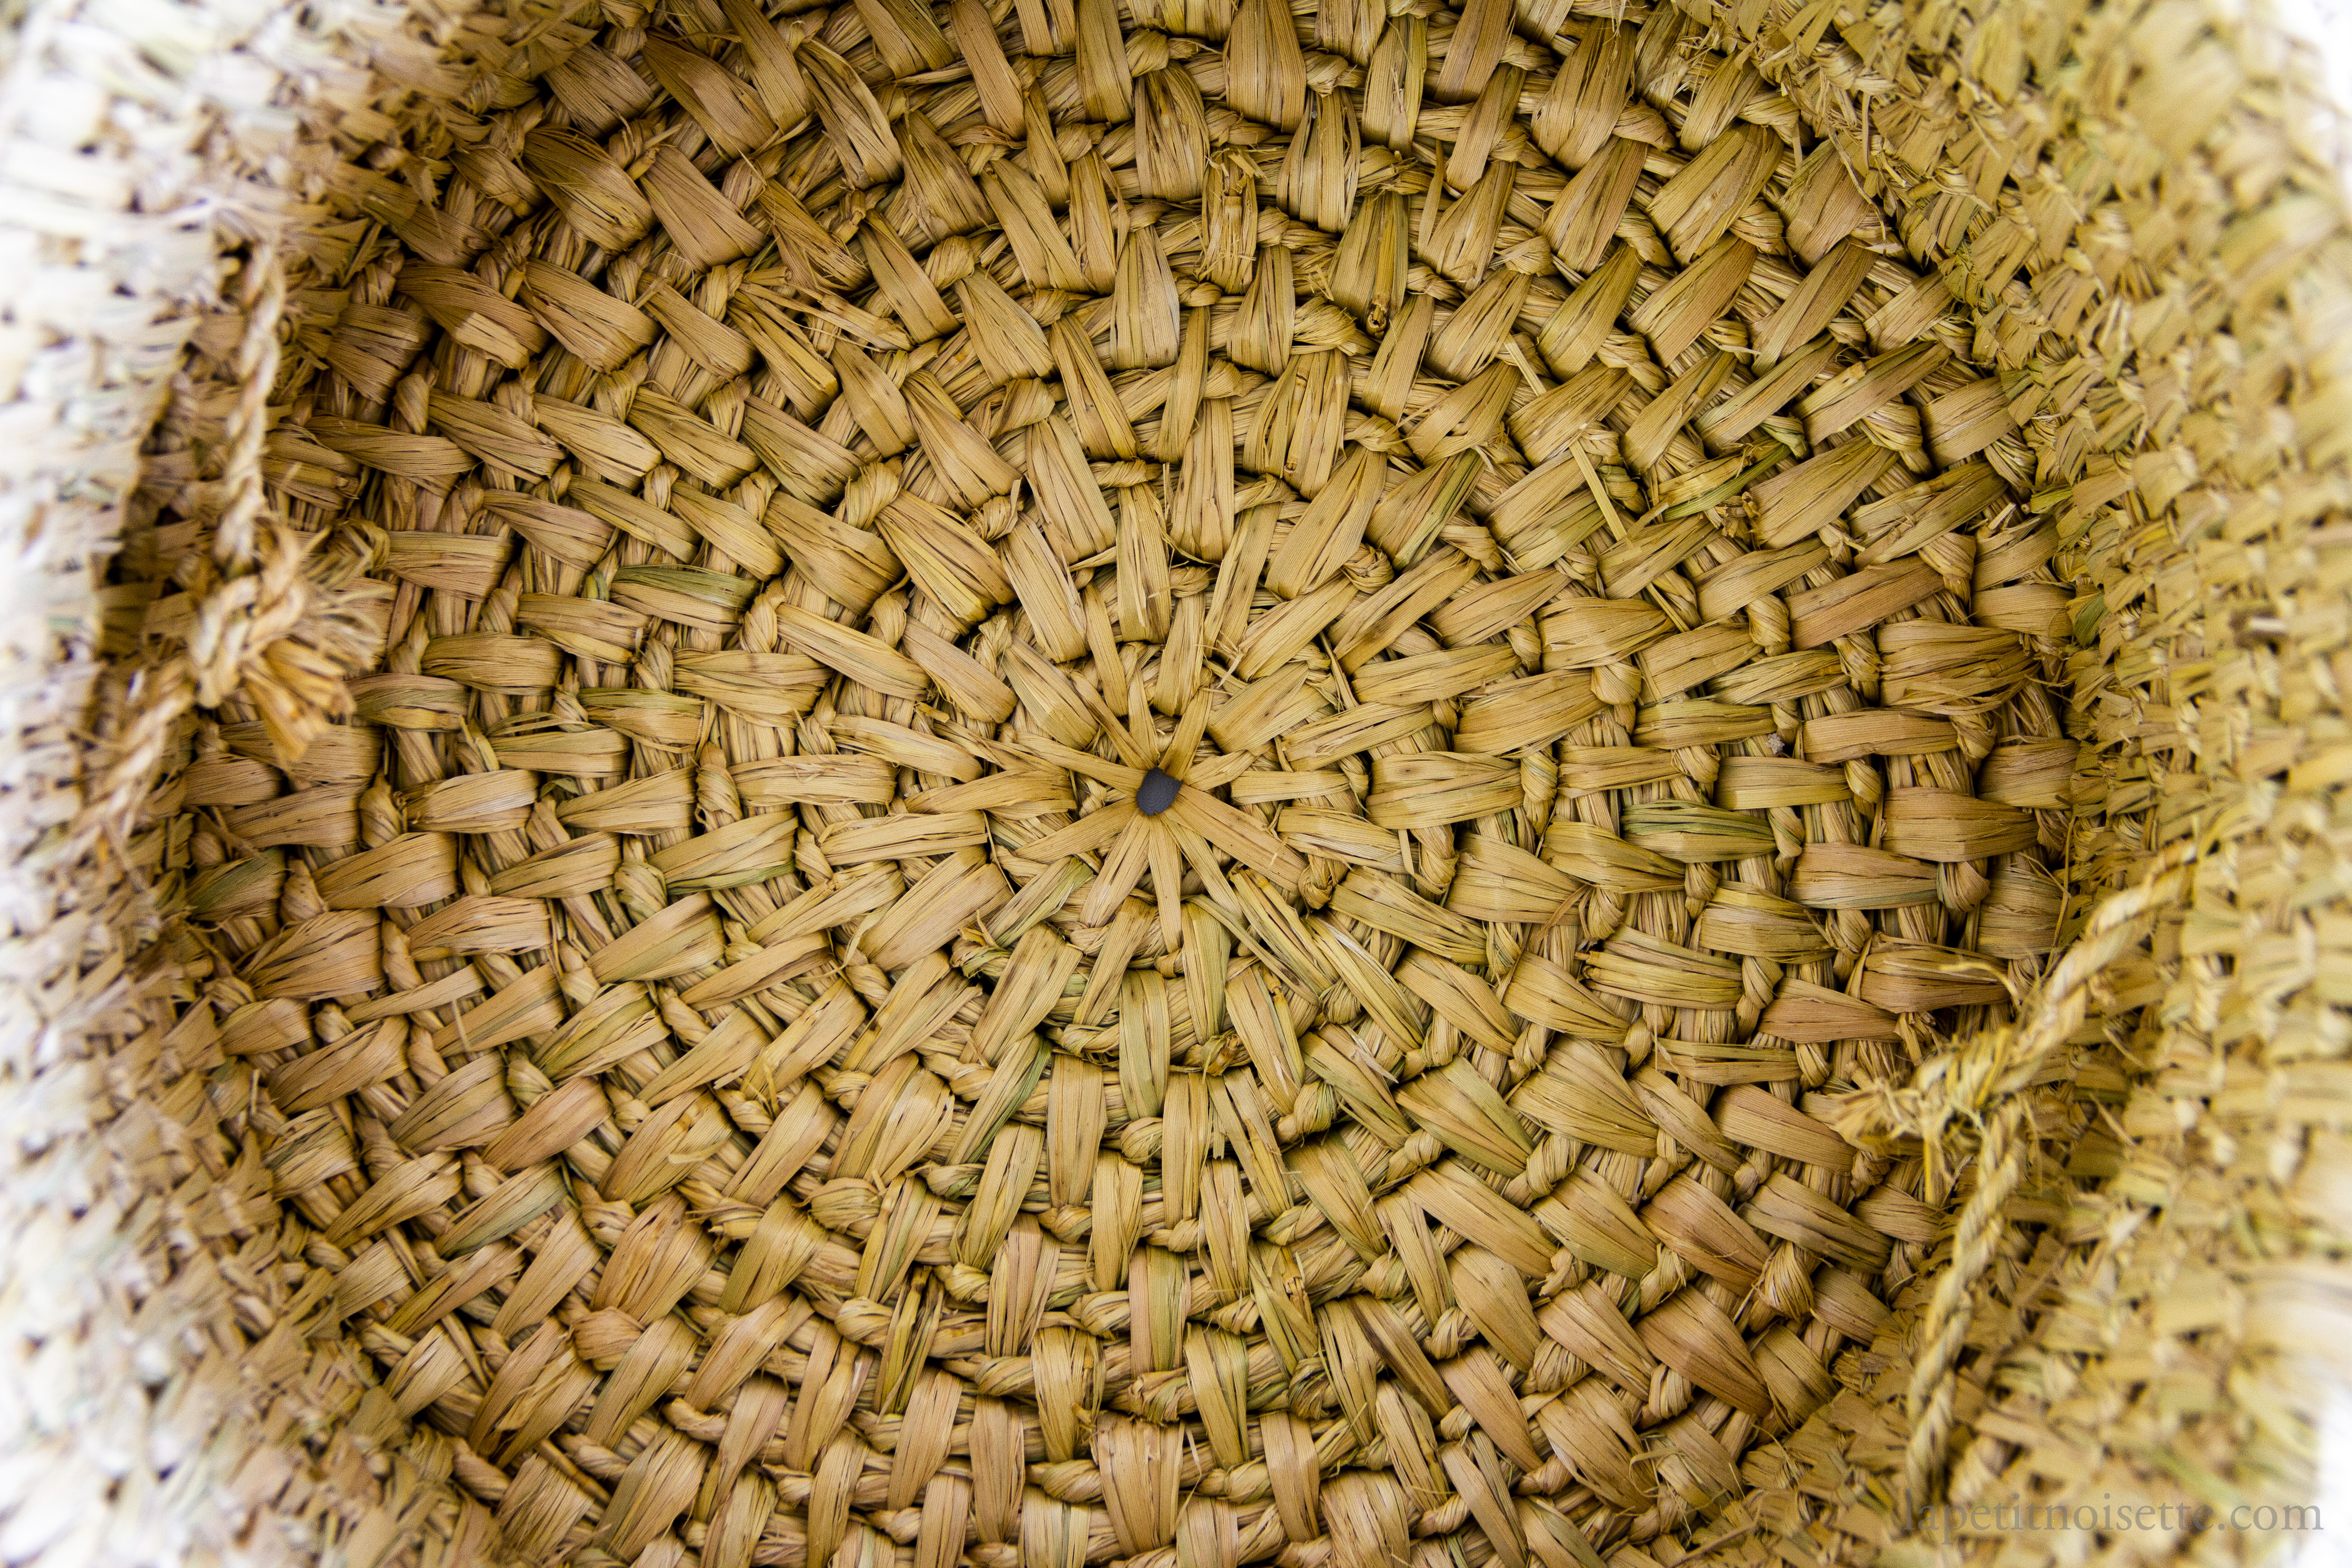 The inside of a traditional japanese straw basket know as a warabitsu used to keep rice warm showing the intricate patterns of weaving.